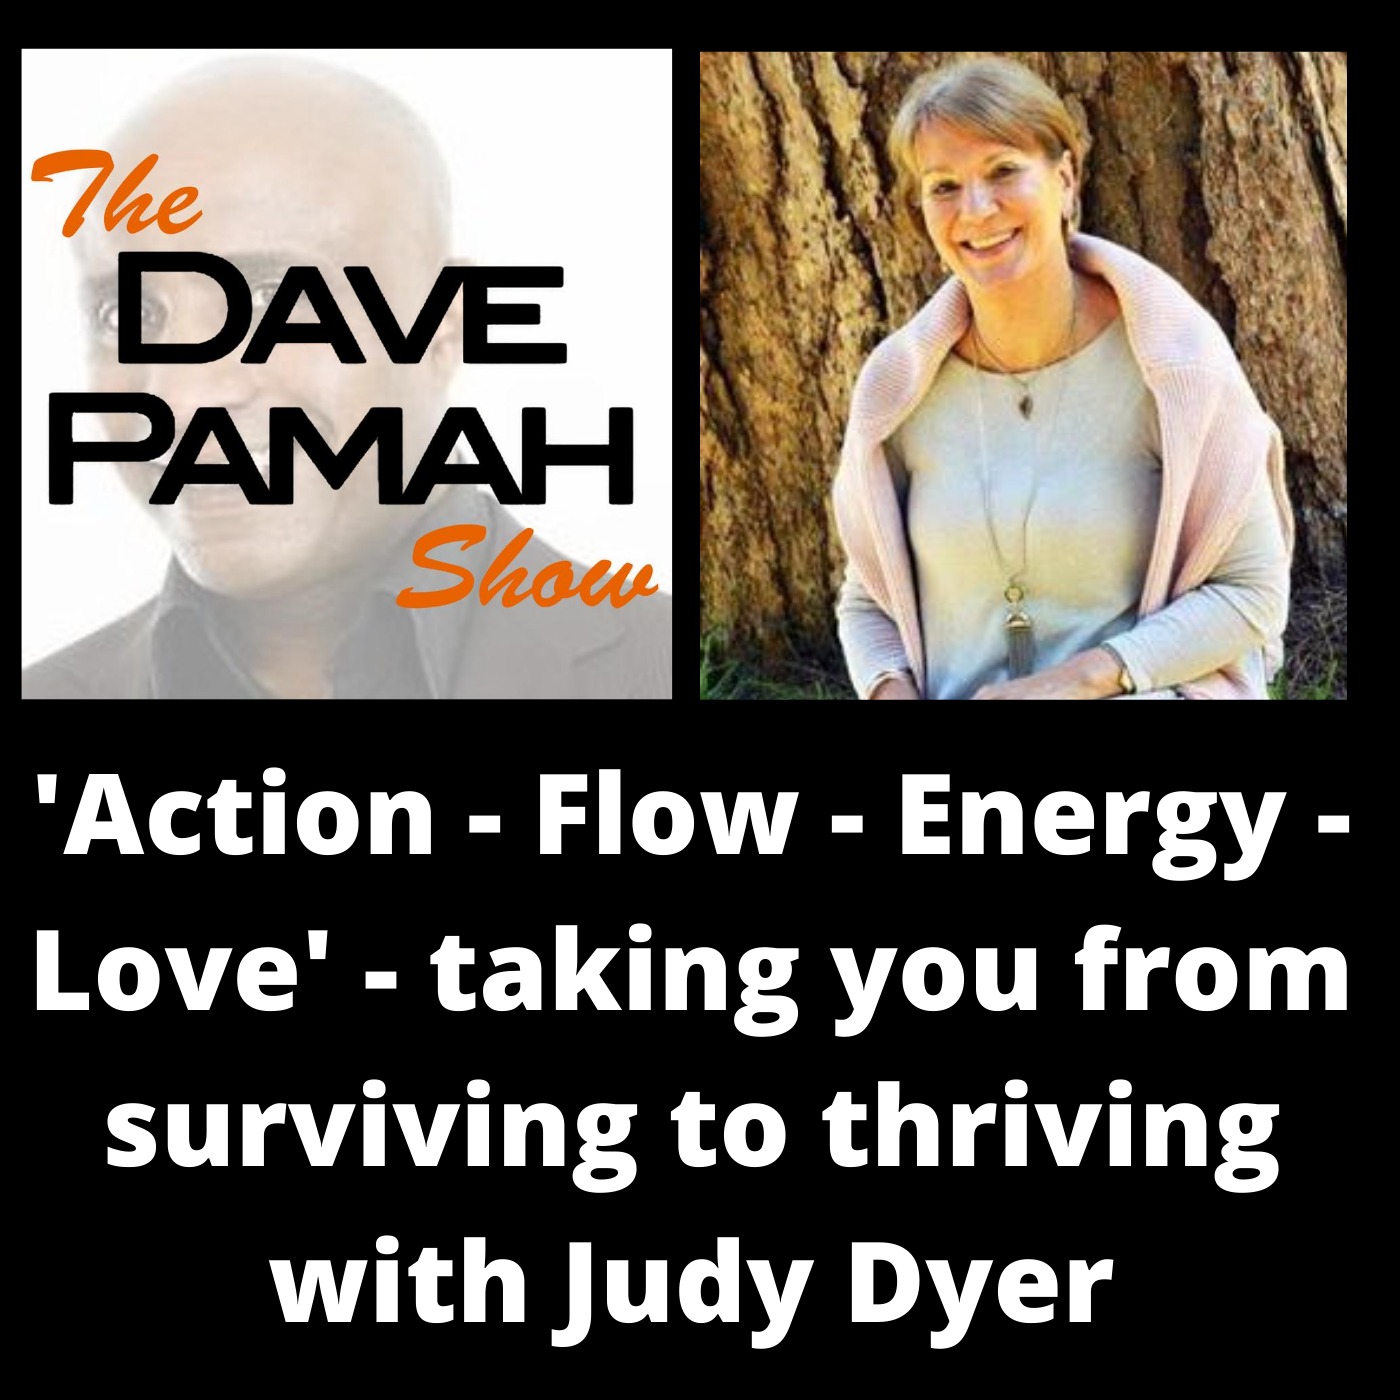 'Action - Flow - Energy - Love' - taking you from surviving to thriving with Judy Dyer